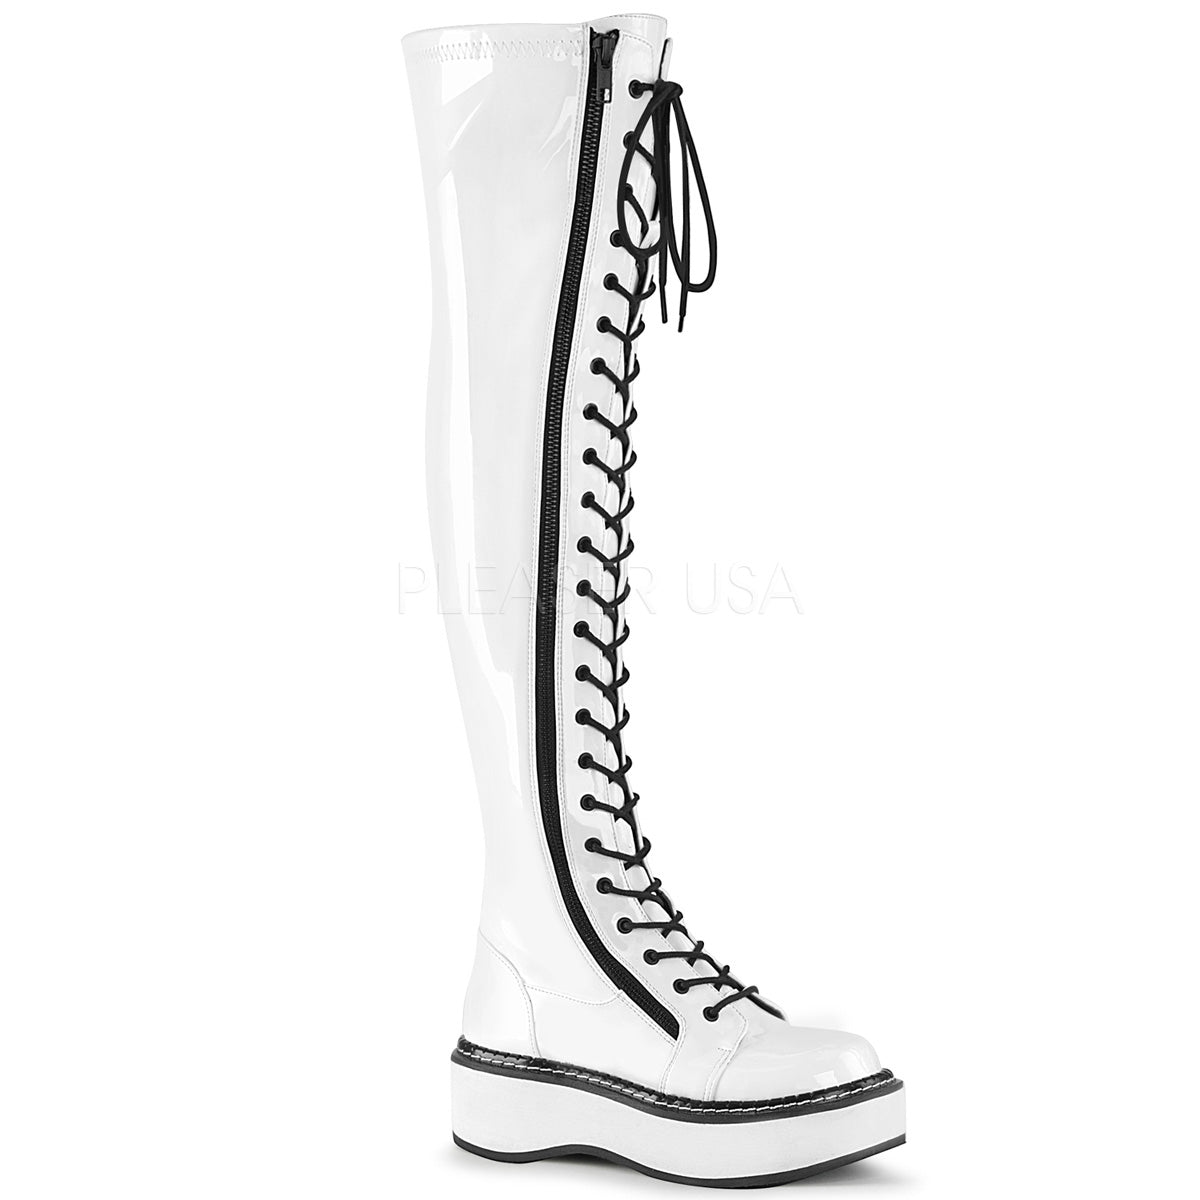 Demonia Emily 375 White - Model Express VancouverBoots